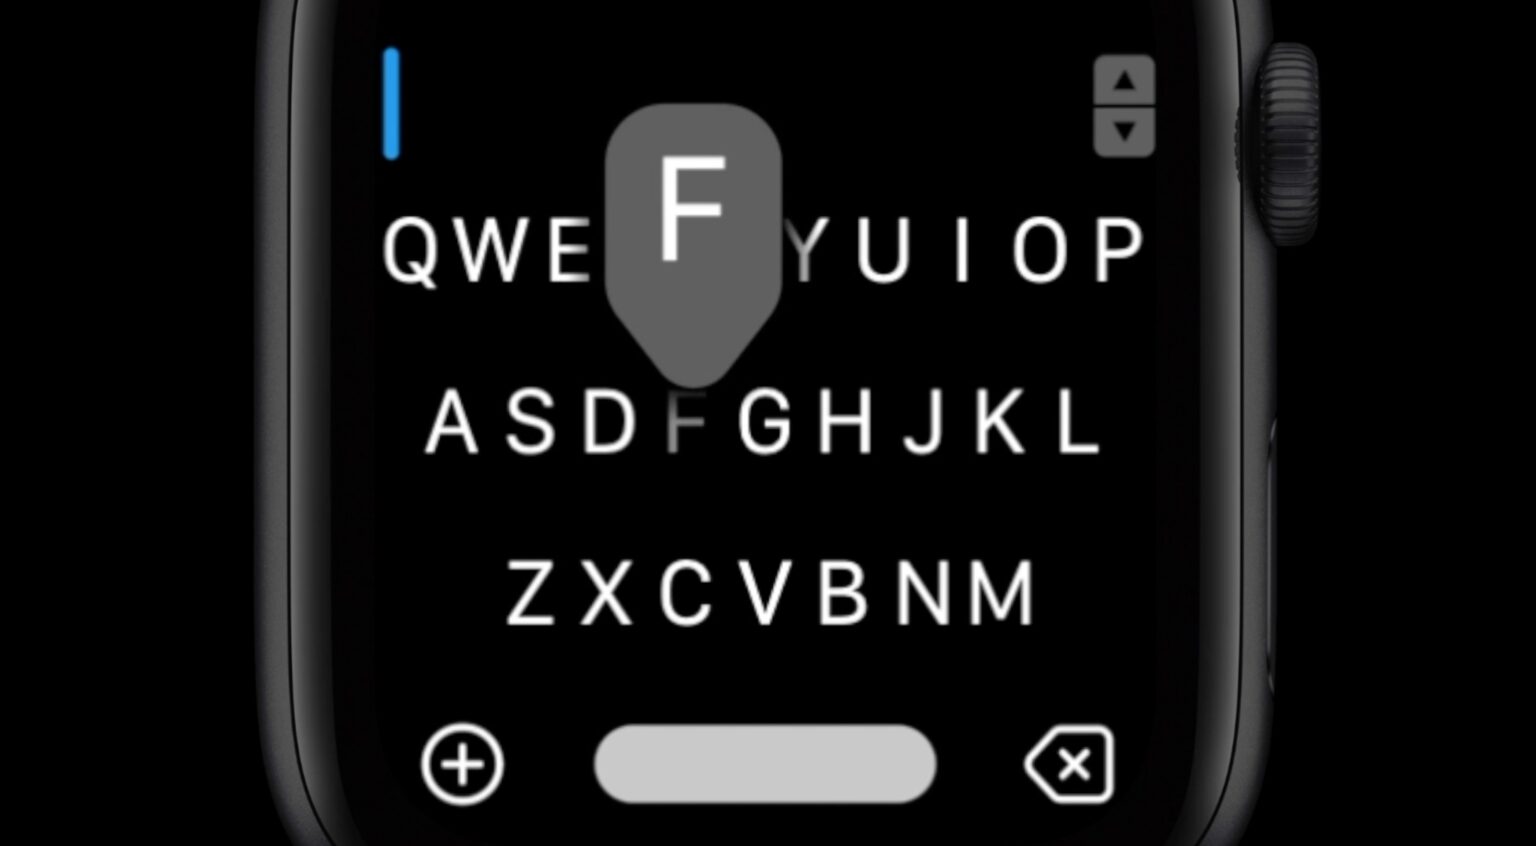 FlickType gives up on iPhone keyboard